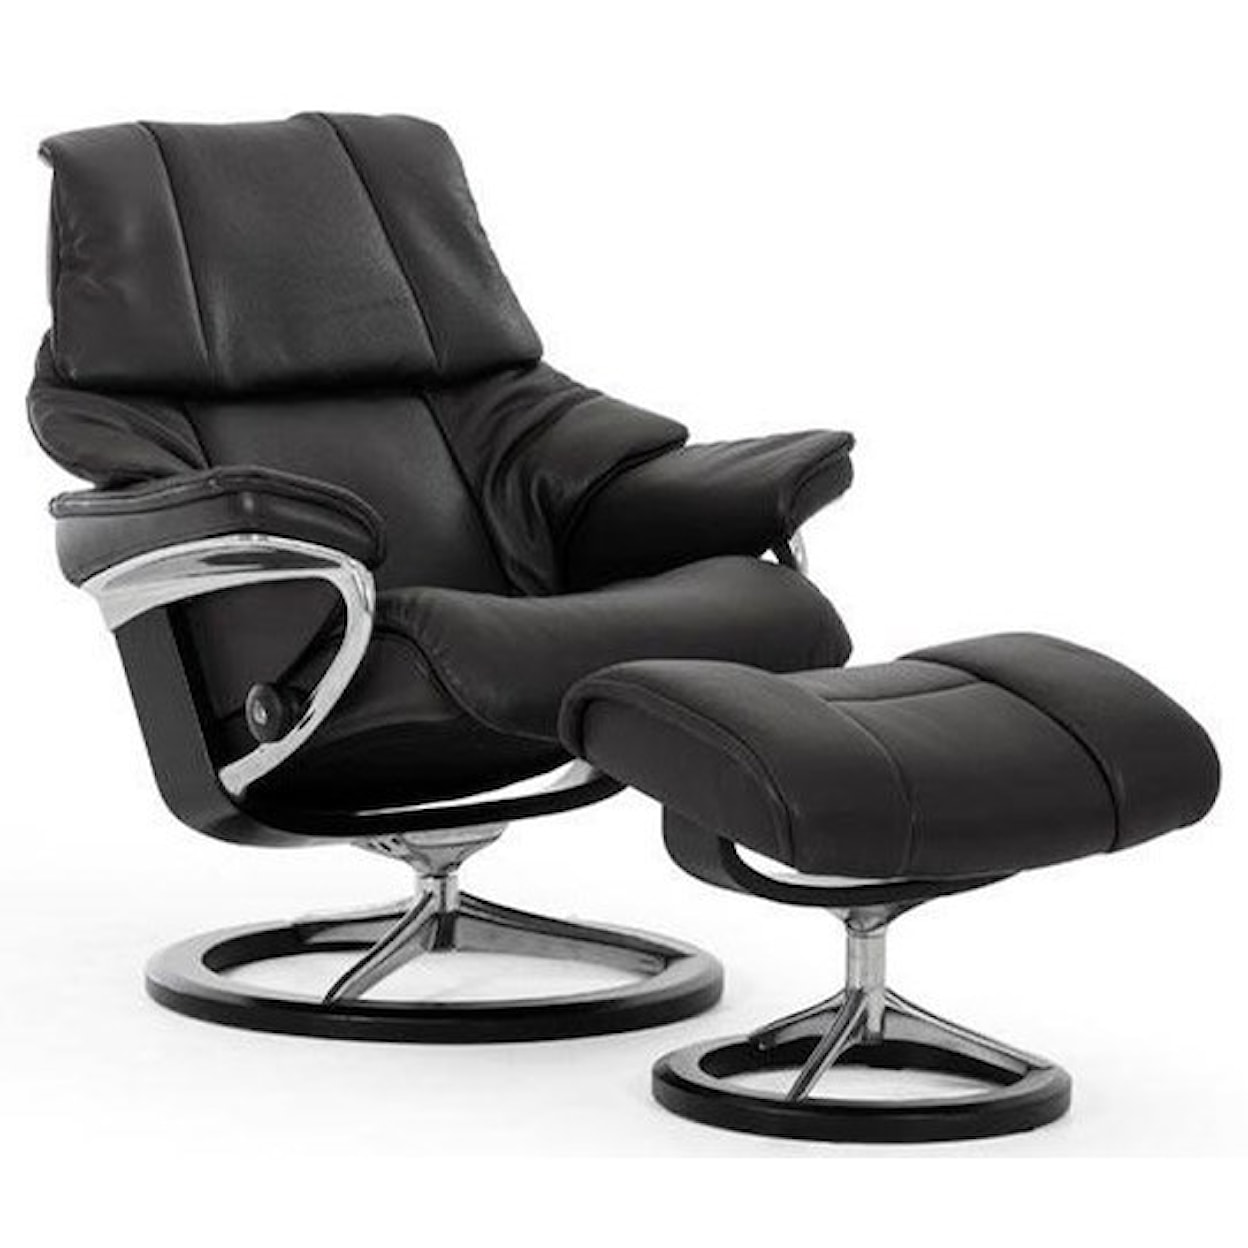 Stressless by Ekornes Reno Large Reclining Chair and Ottoman